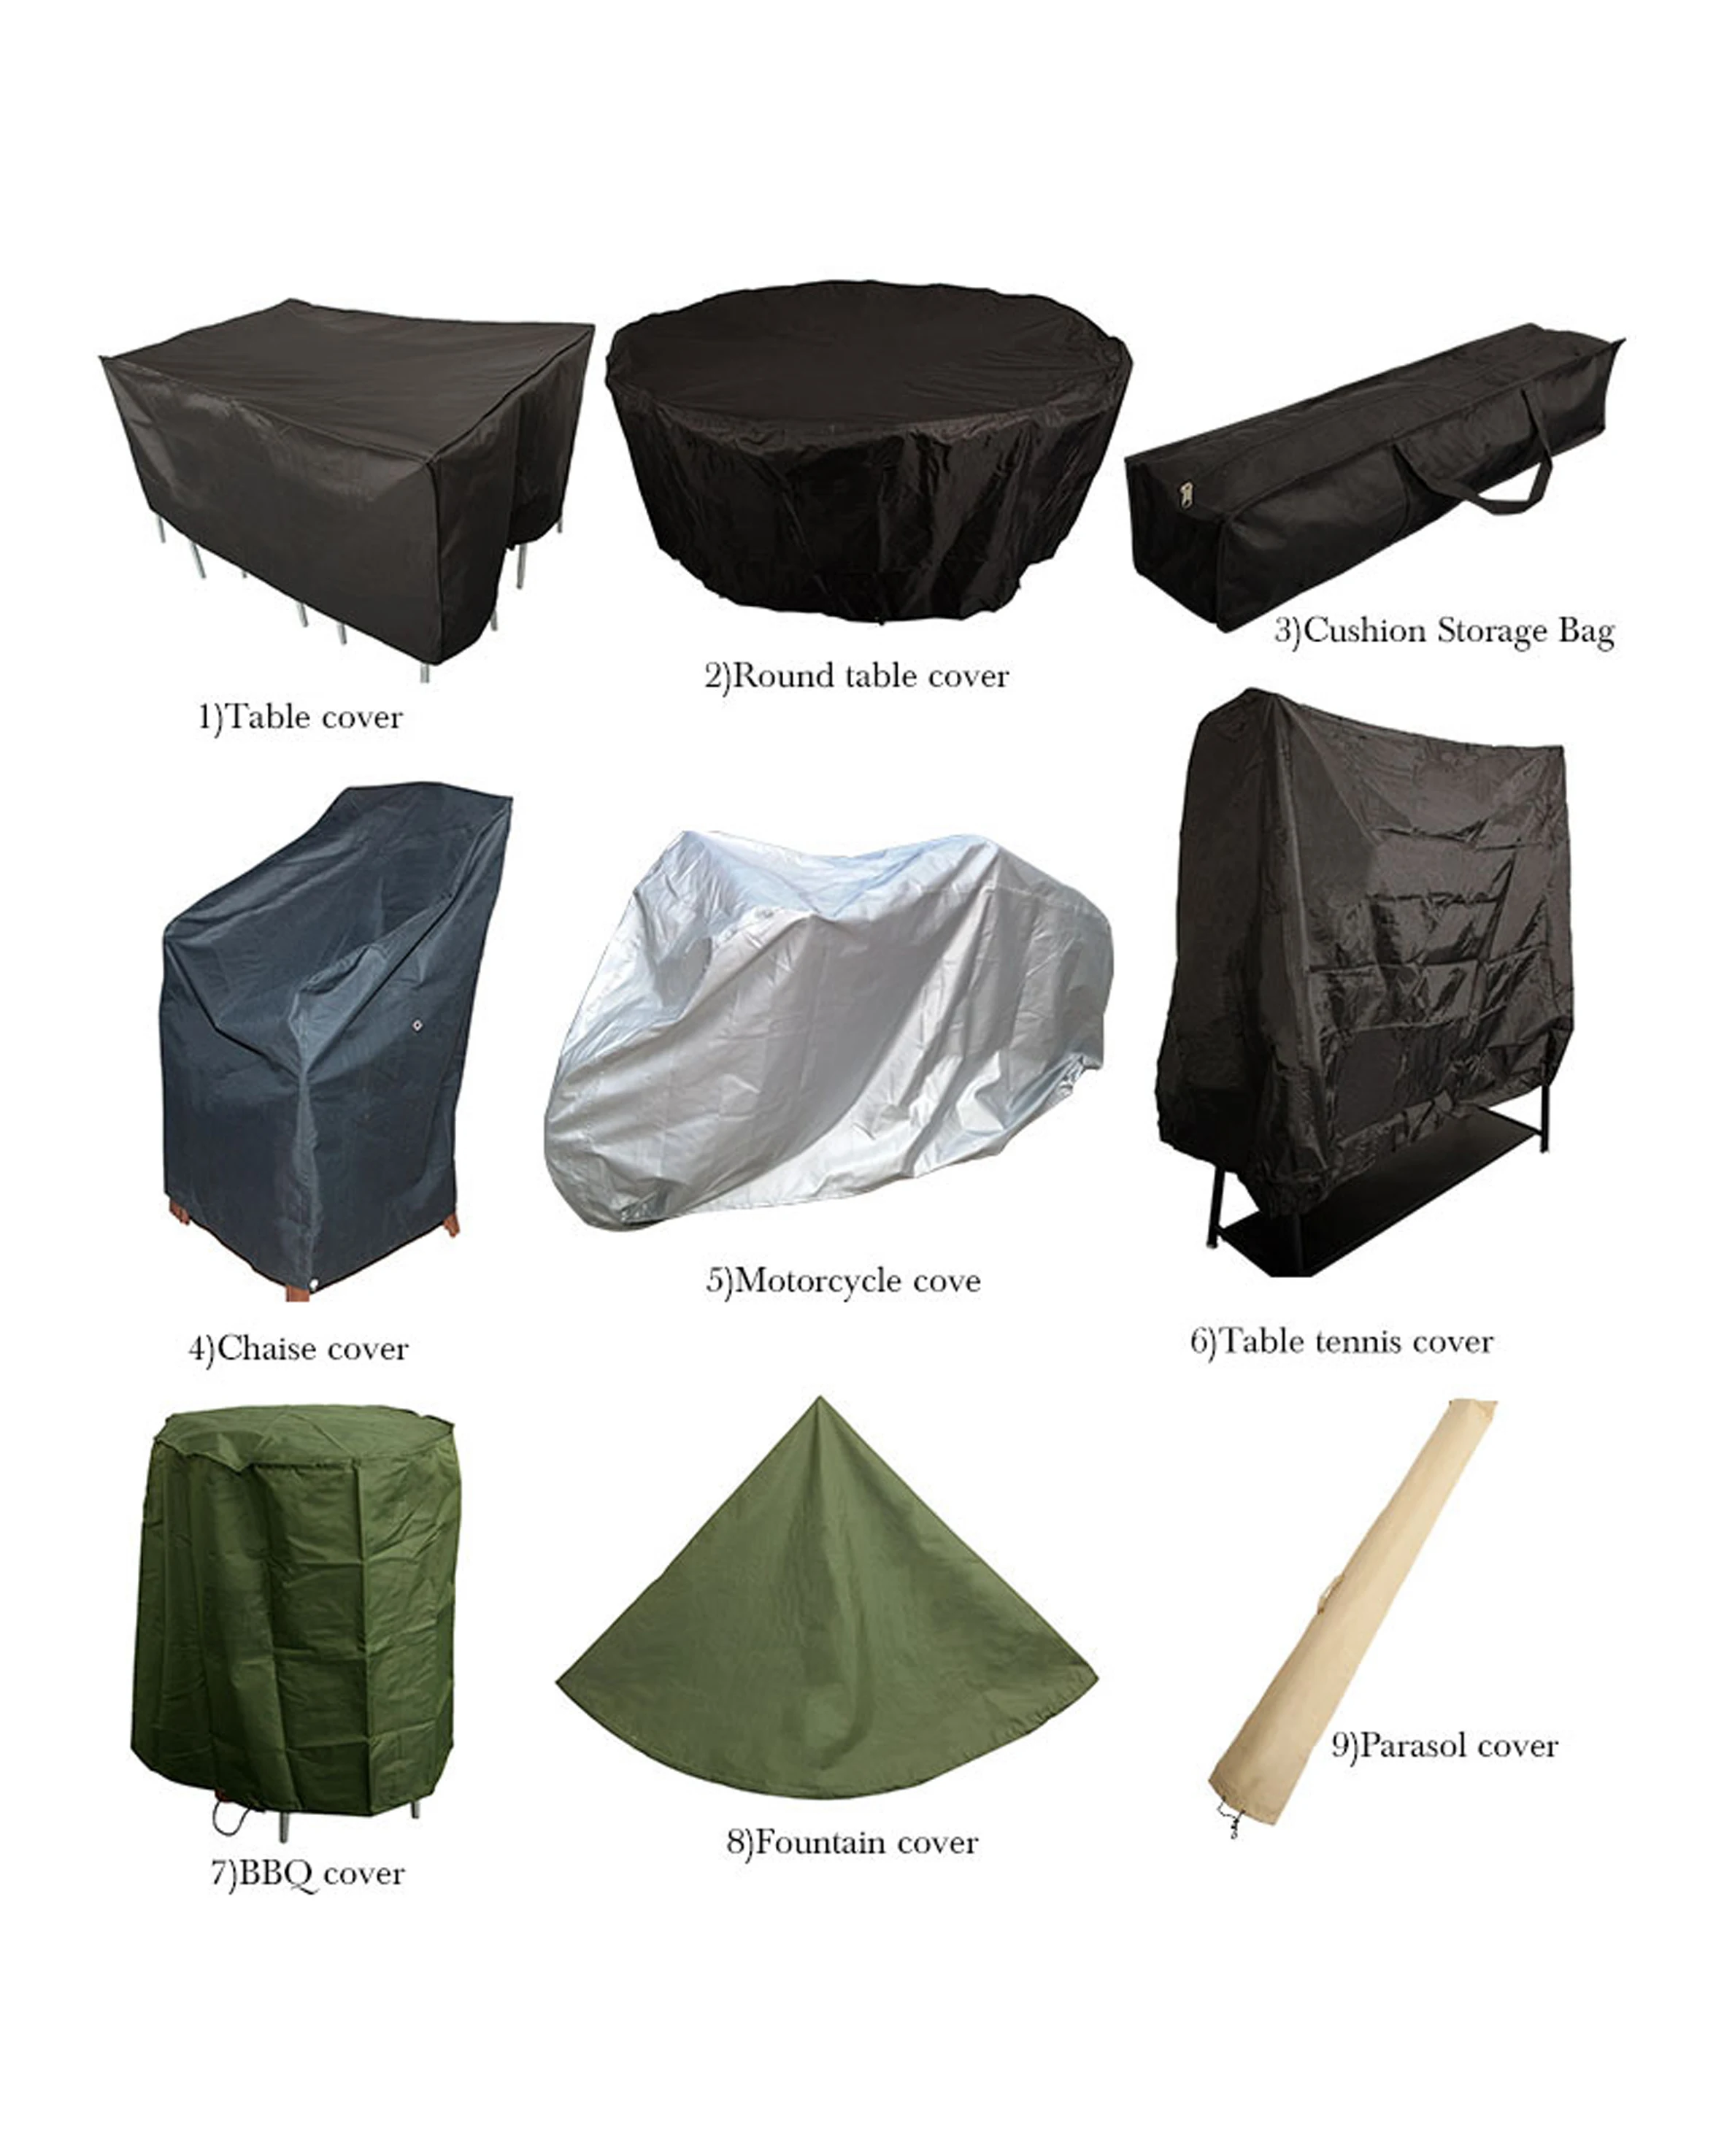 
types outdoor waterproof polyester PE PEVA furniture accessories zhejiang garden furniture cover fabric  (62490688860)